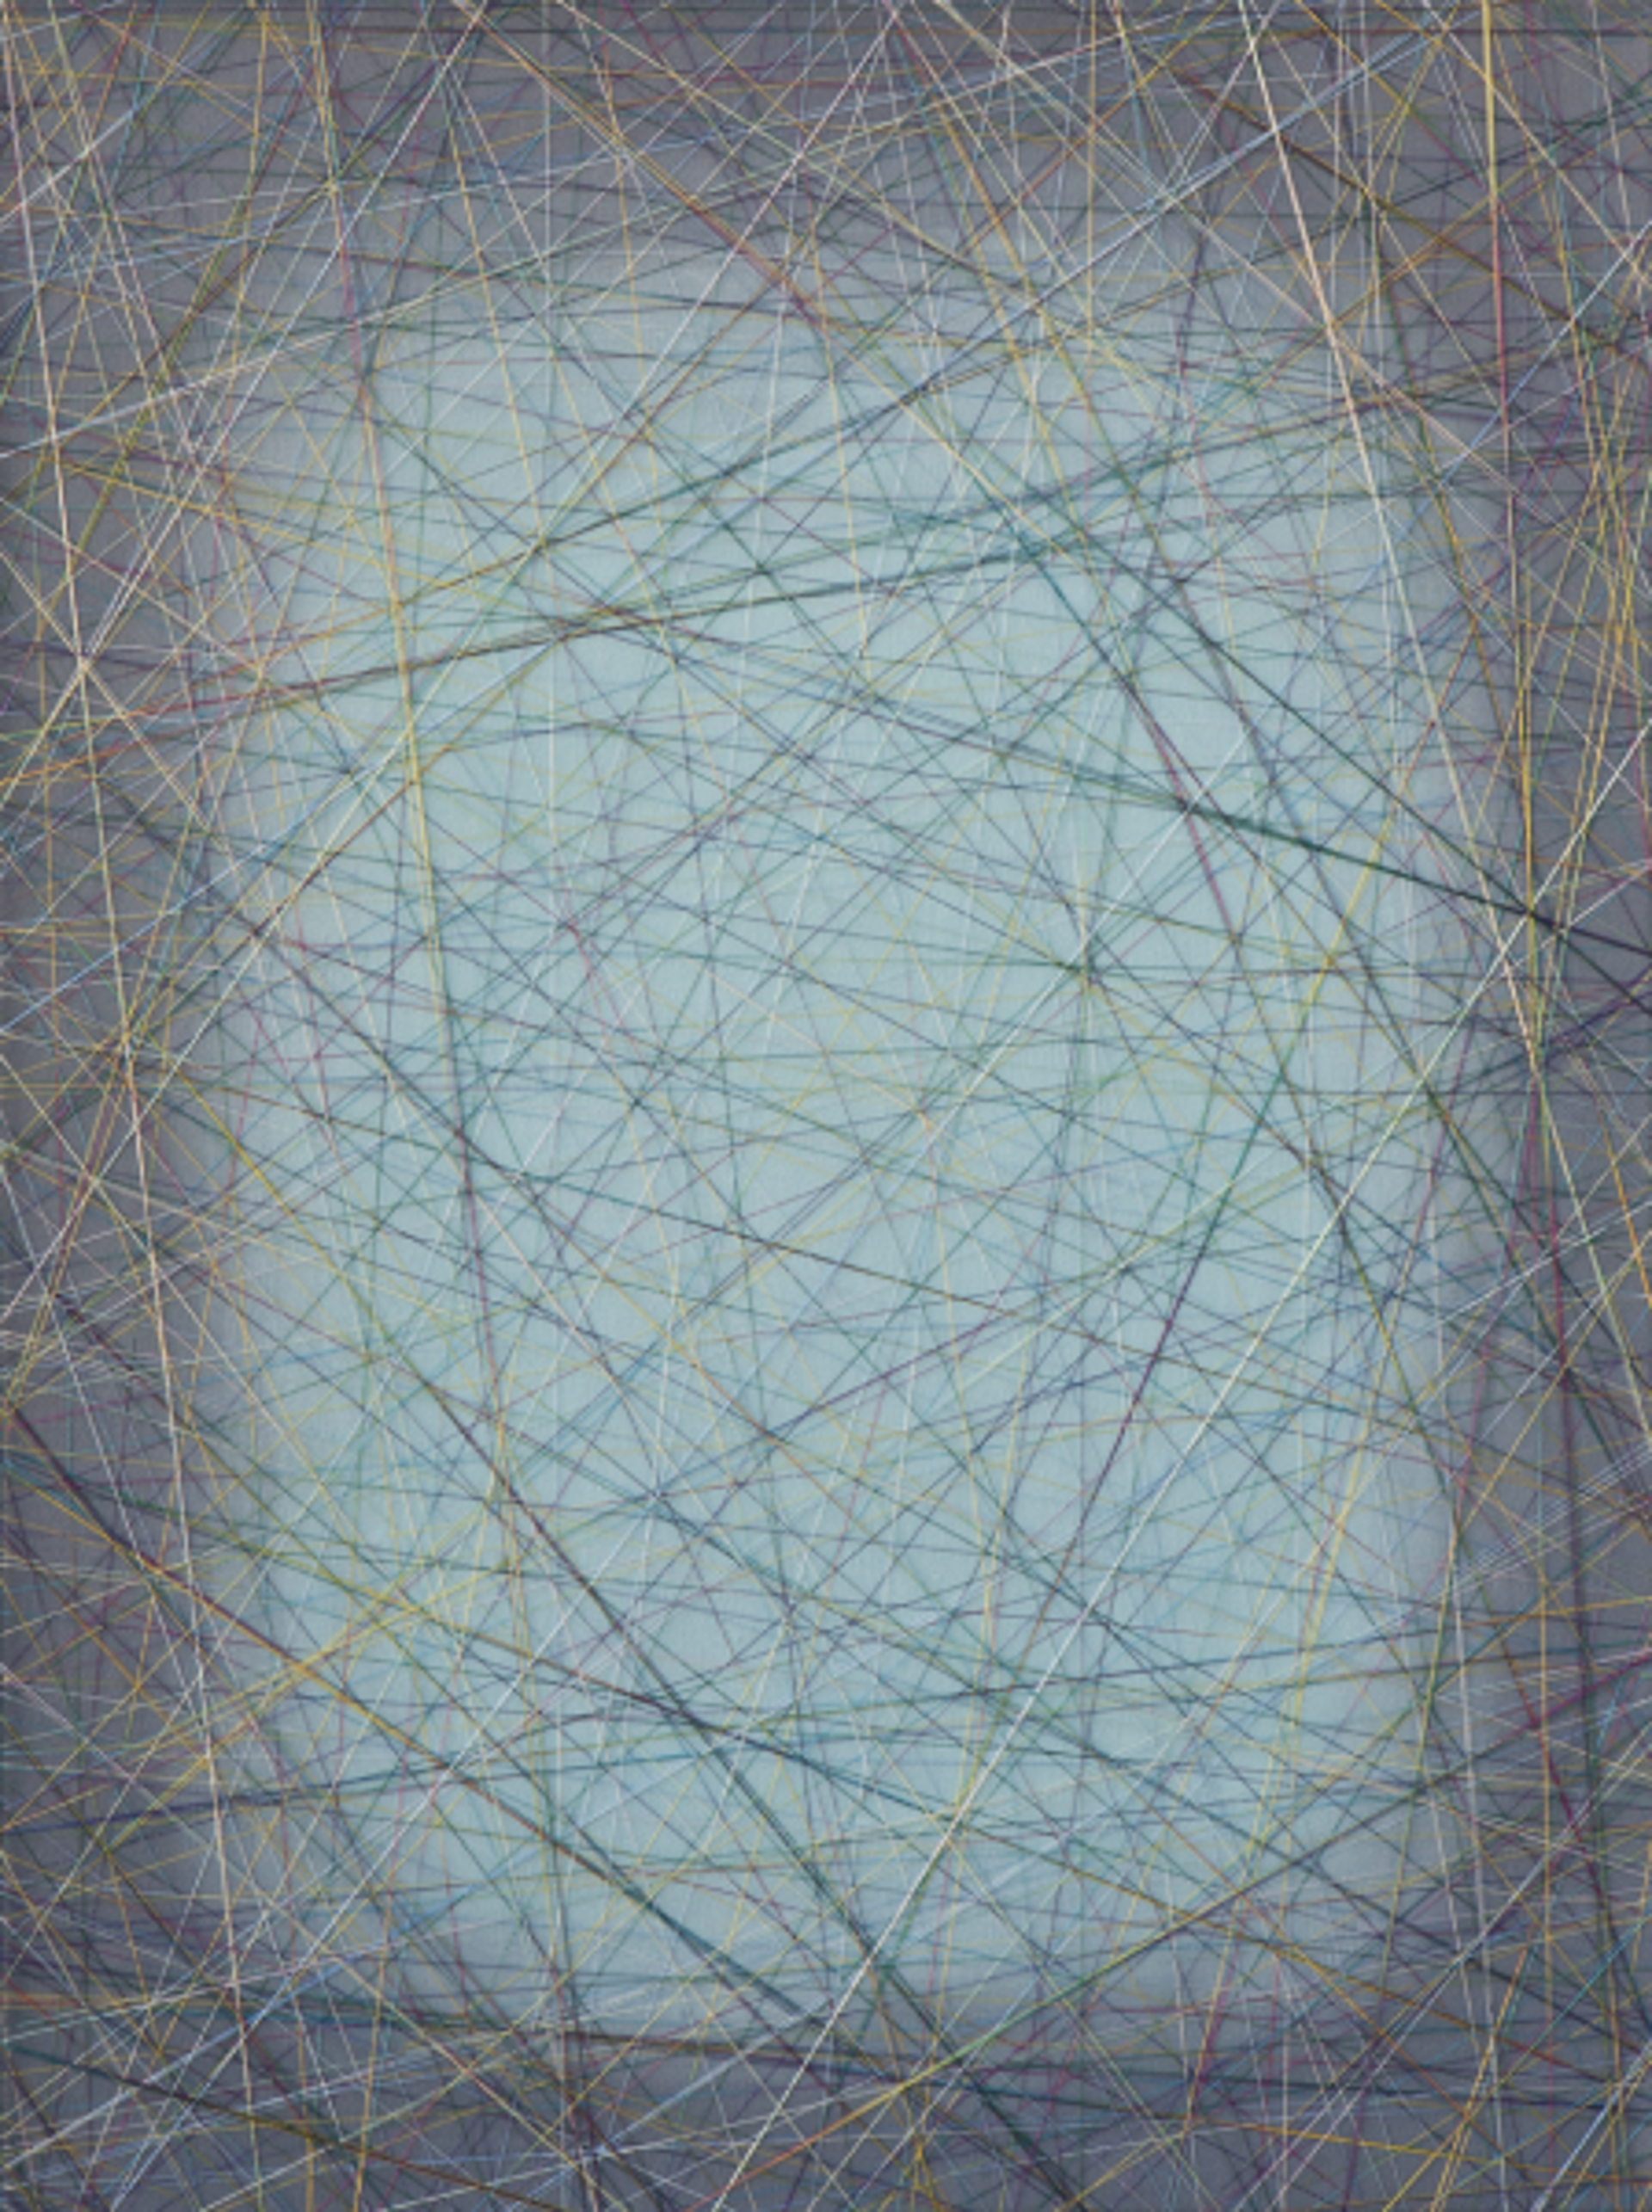 Intersecting Thread No. 4 by Angela Johal